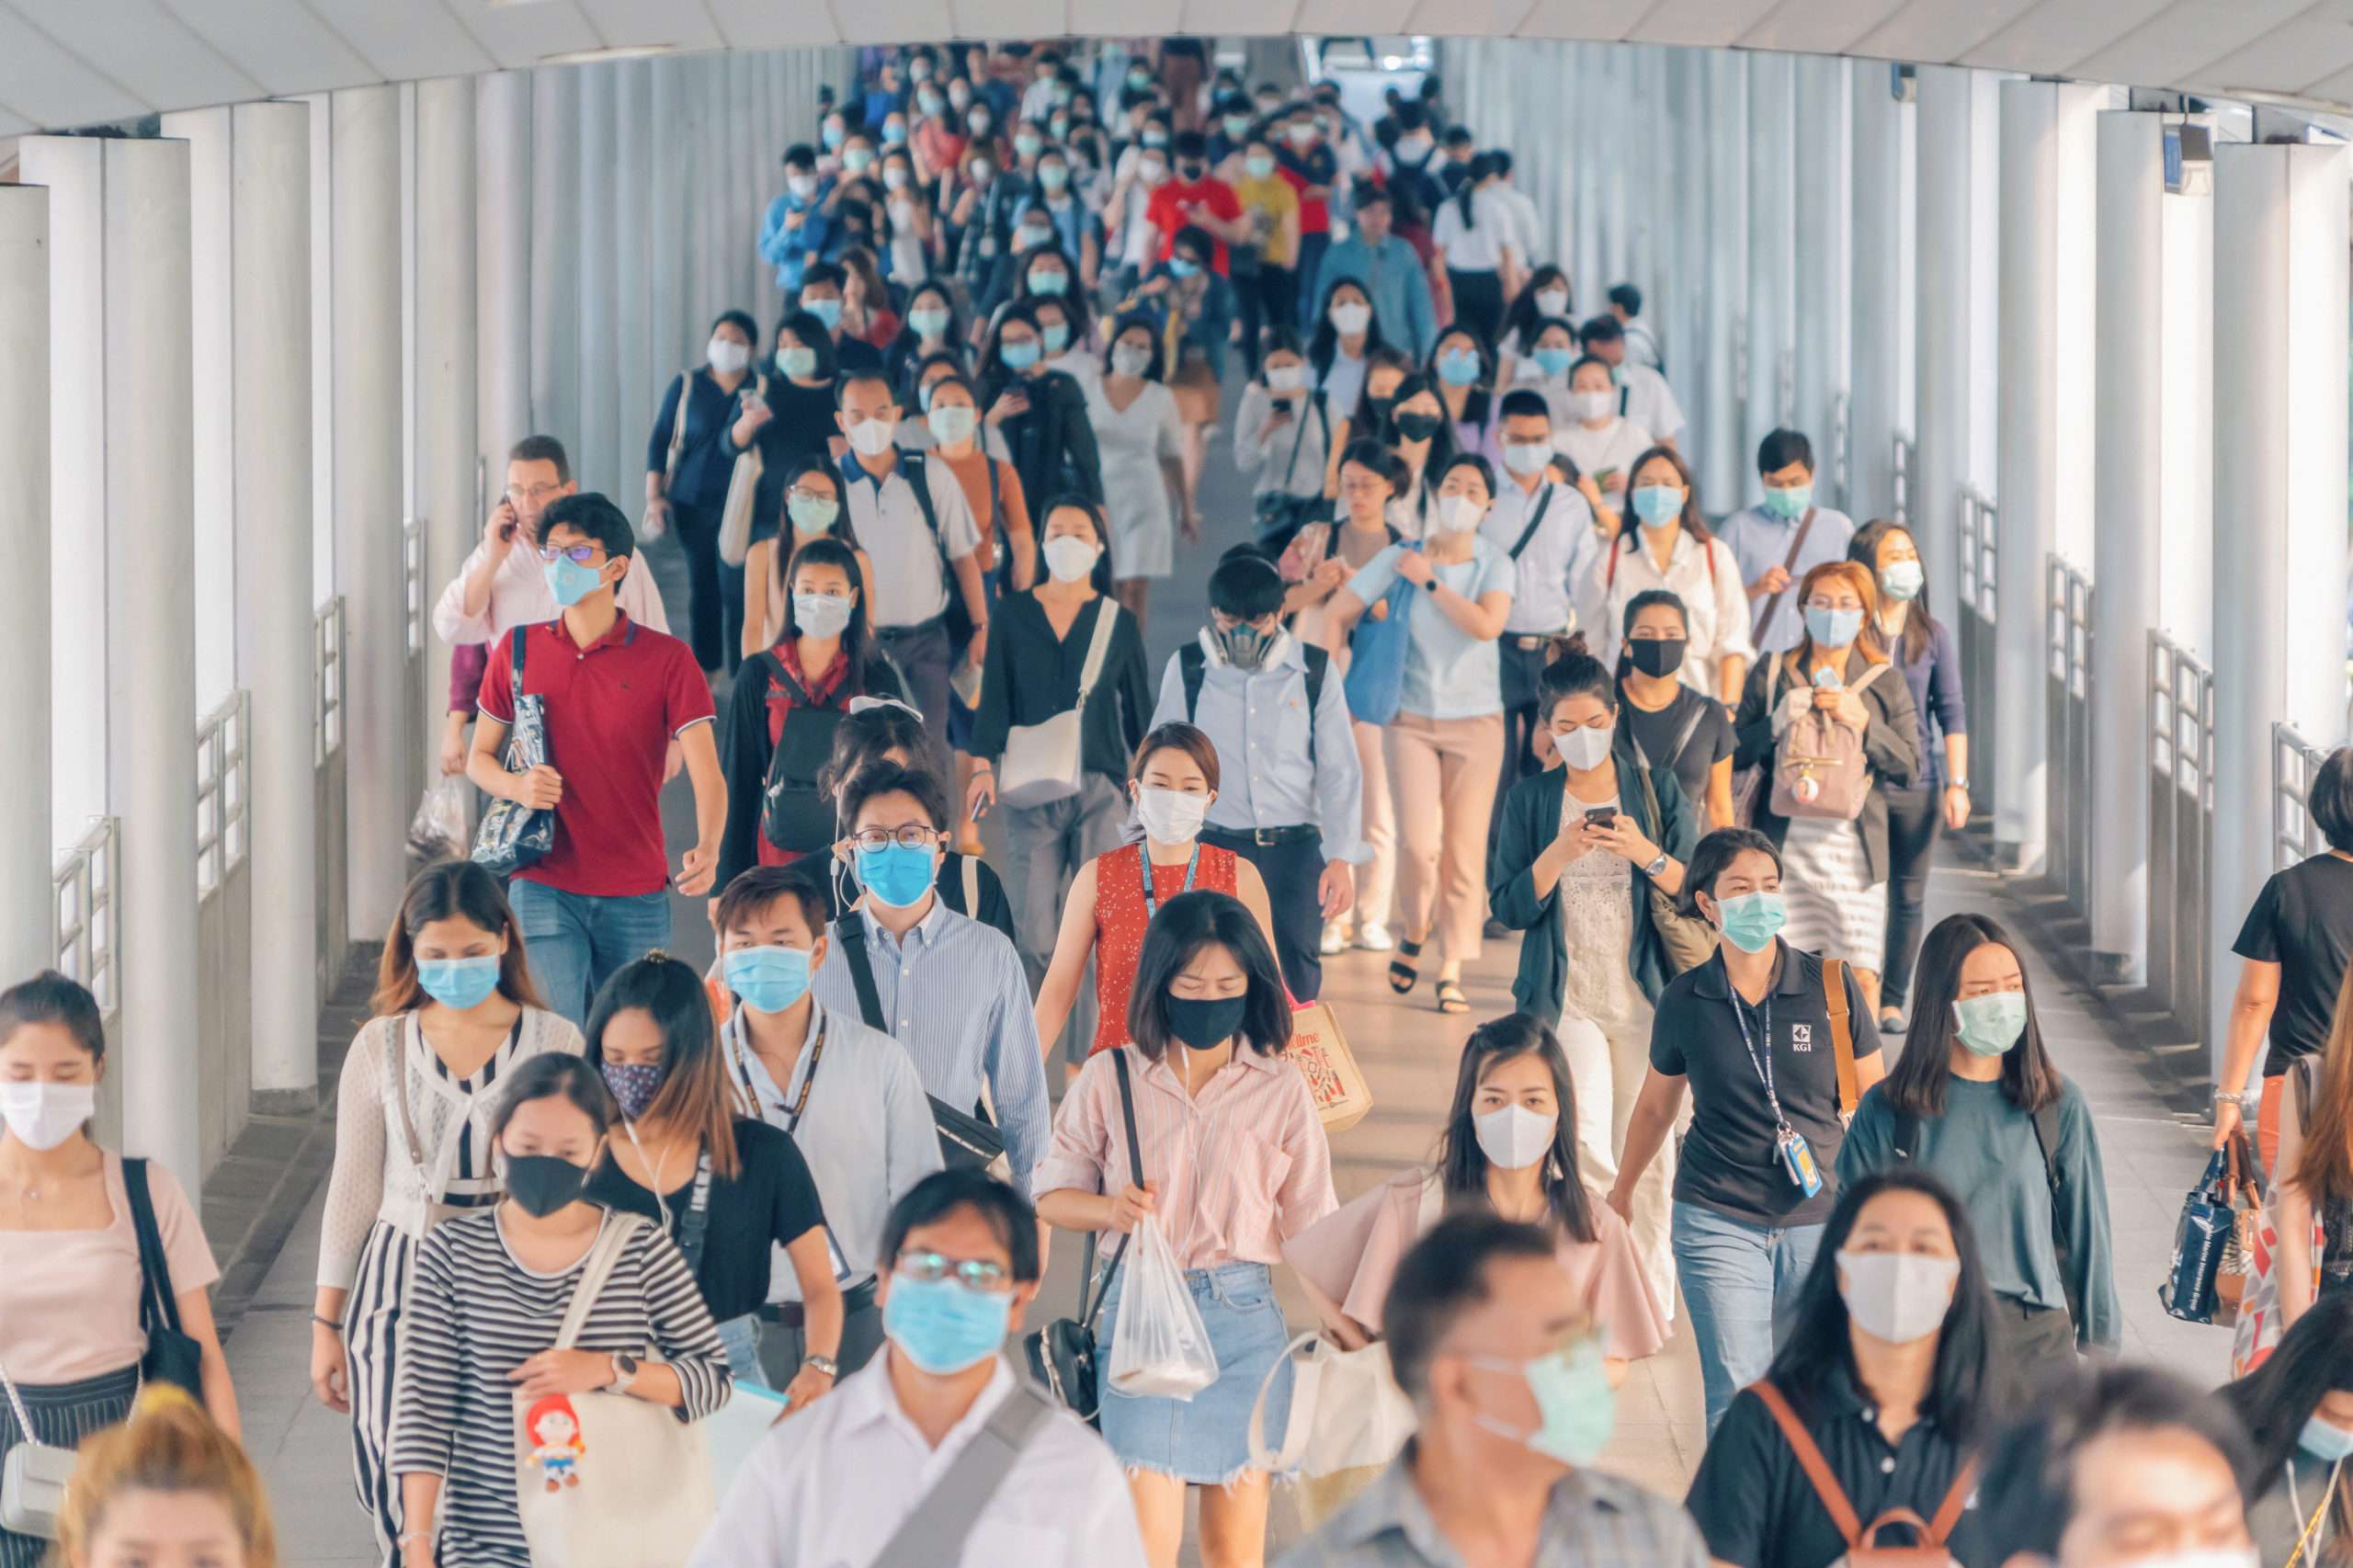 Prominent Researchers Say a Widely Cited Study on Wearing Masks Is Badly Flawed